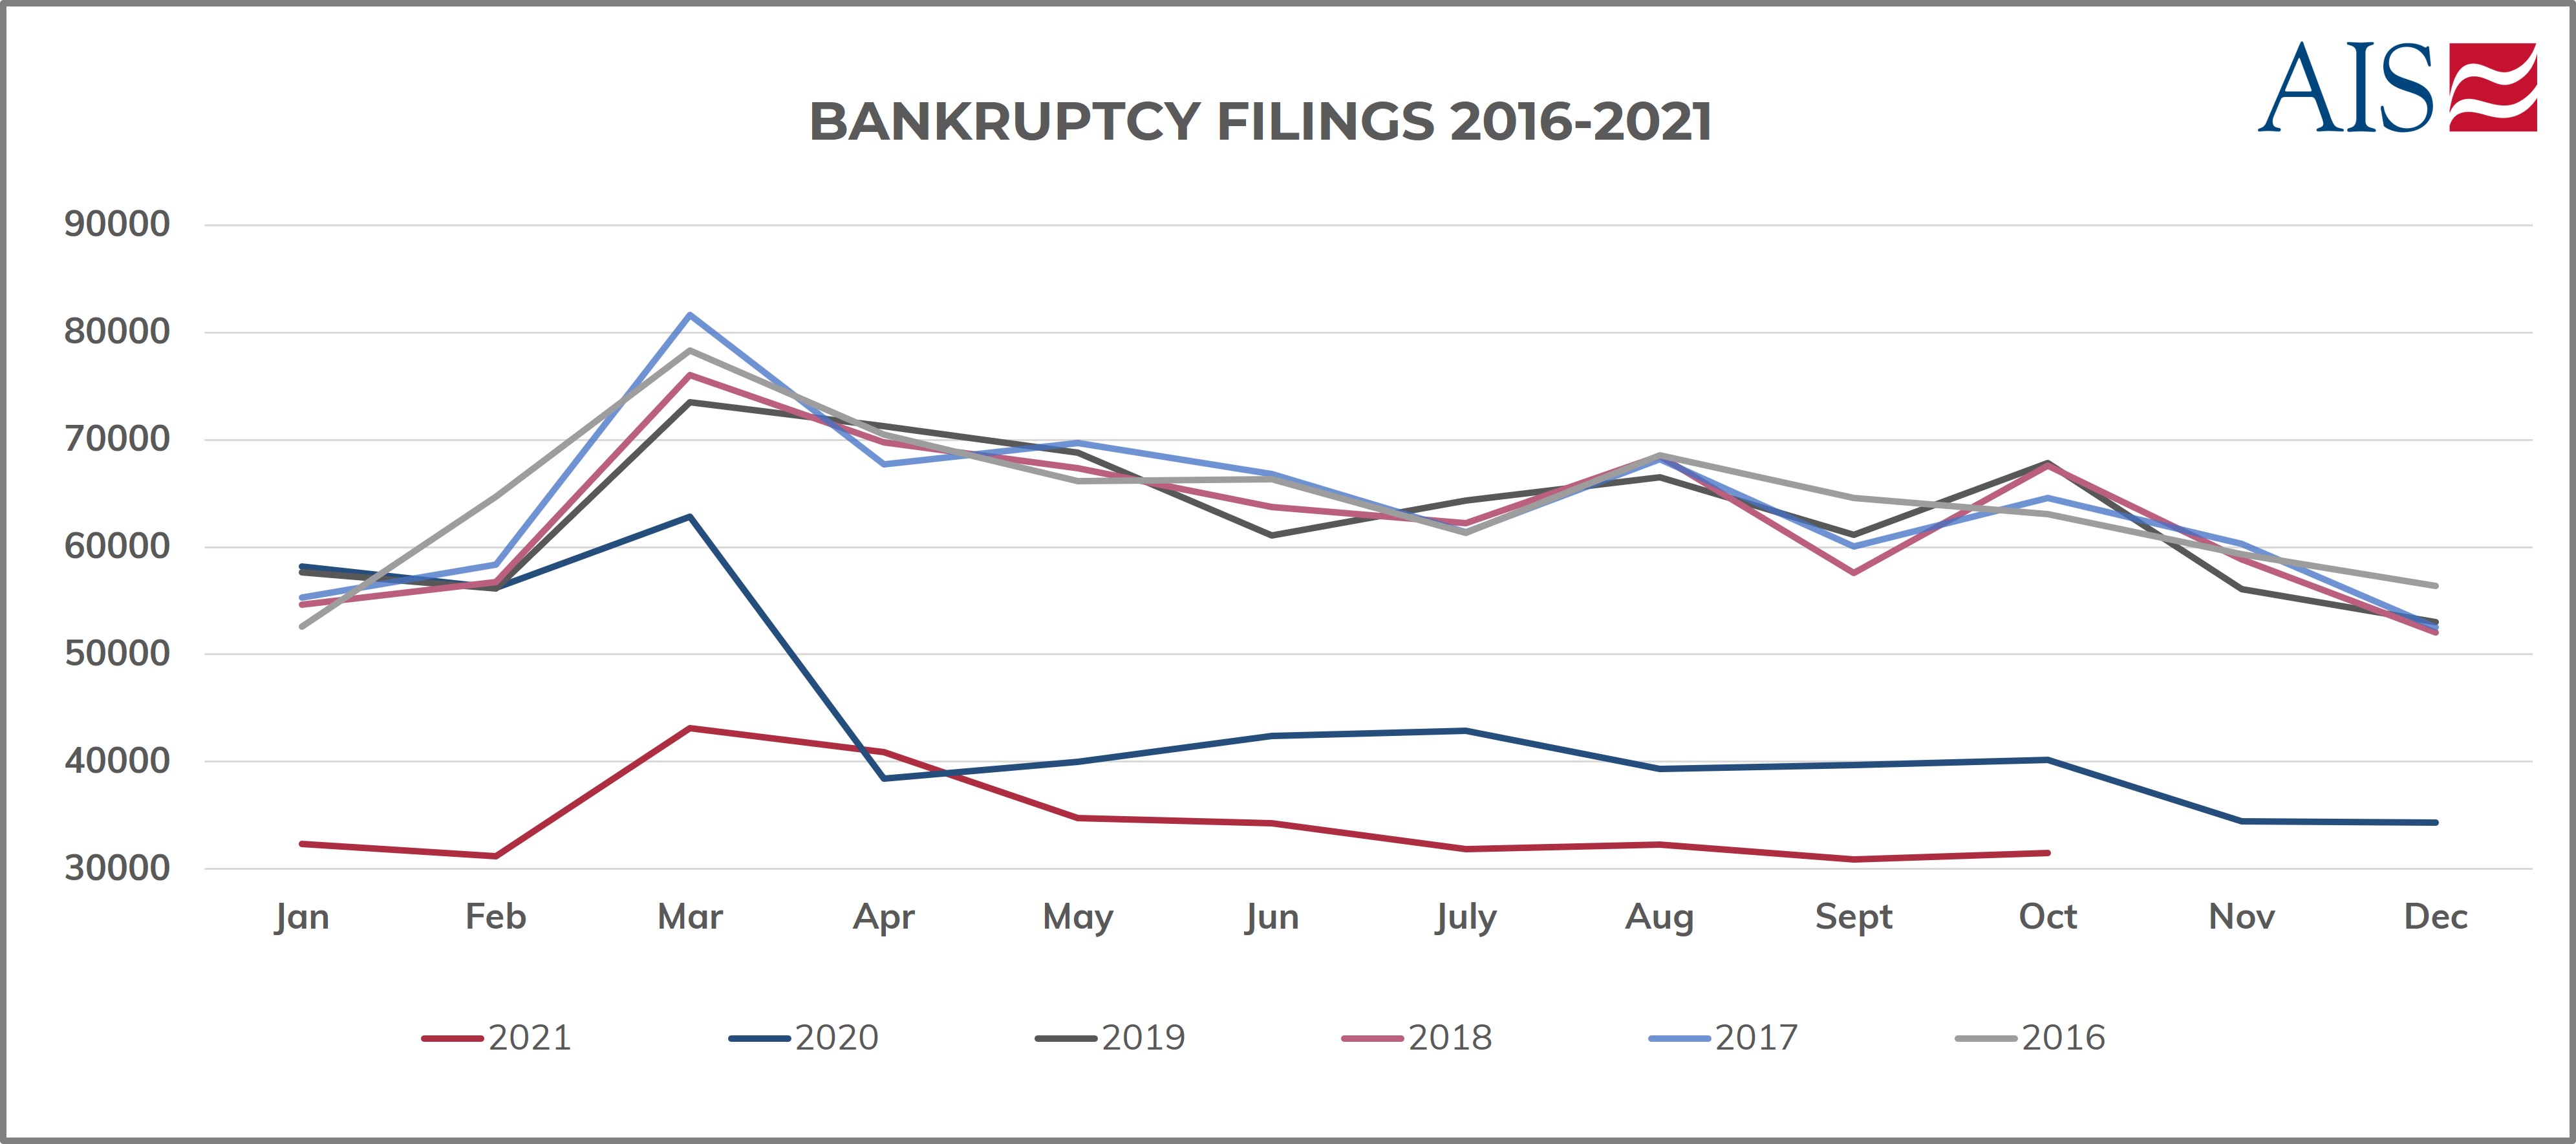 AIS Insight_October 2021_BANKRUPTCY FILINGS 2016 - 2021 (GRAPH)-1